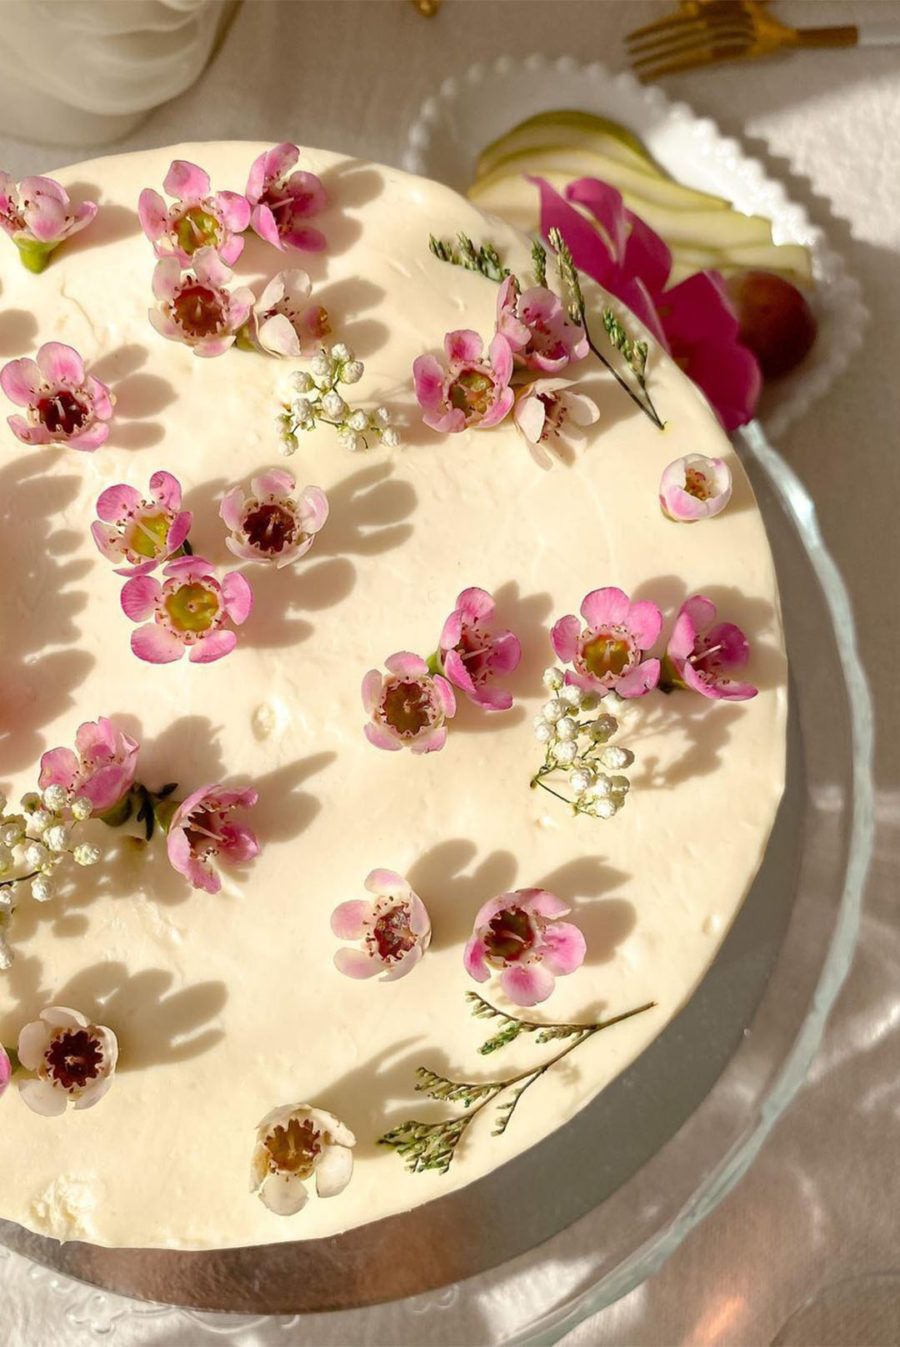 Pretty cake with pink flowers